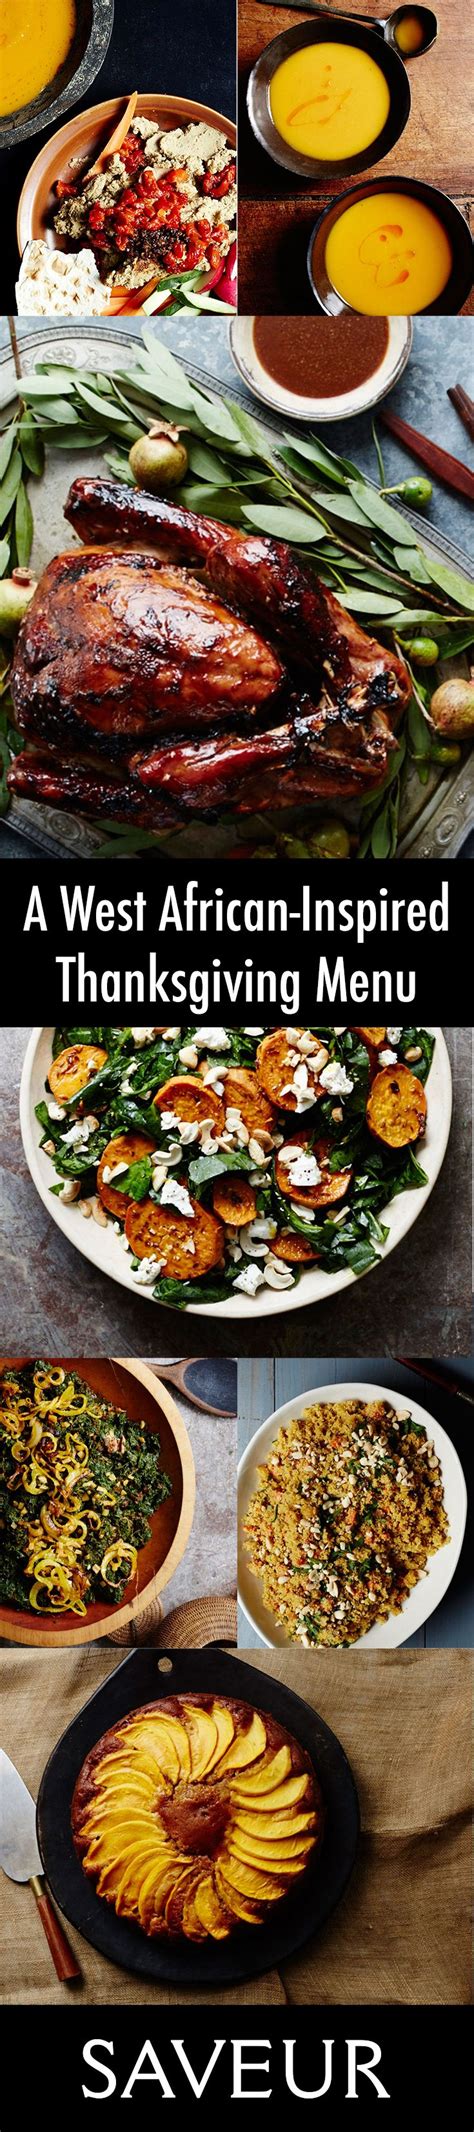 Well, they are traditional thanksgiving foods in the sense that americans have been eating some of these foods and other foods as thanksgiving staples for calling this new vegetable a yam came from the african slaves. African American Traditional Food For Thanksgiving : Soul Food Thanksgiving Recipes - While not ...